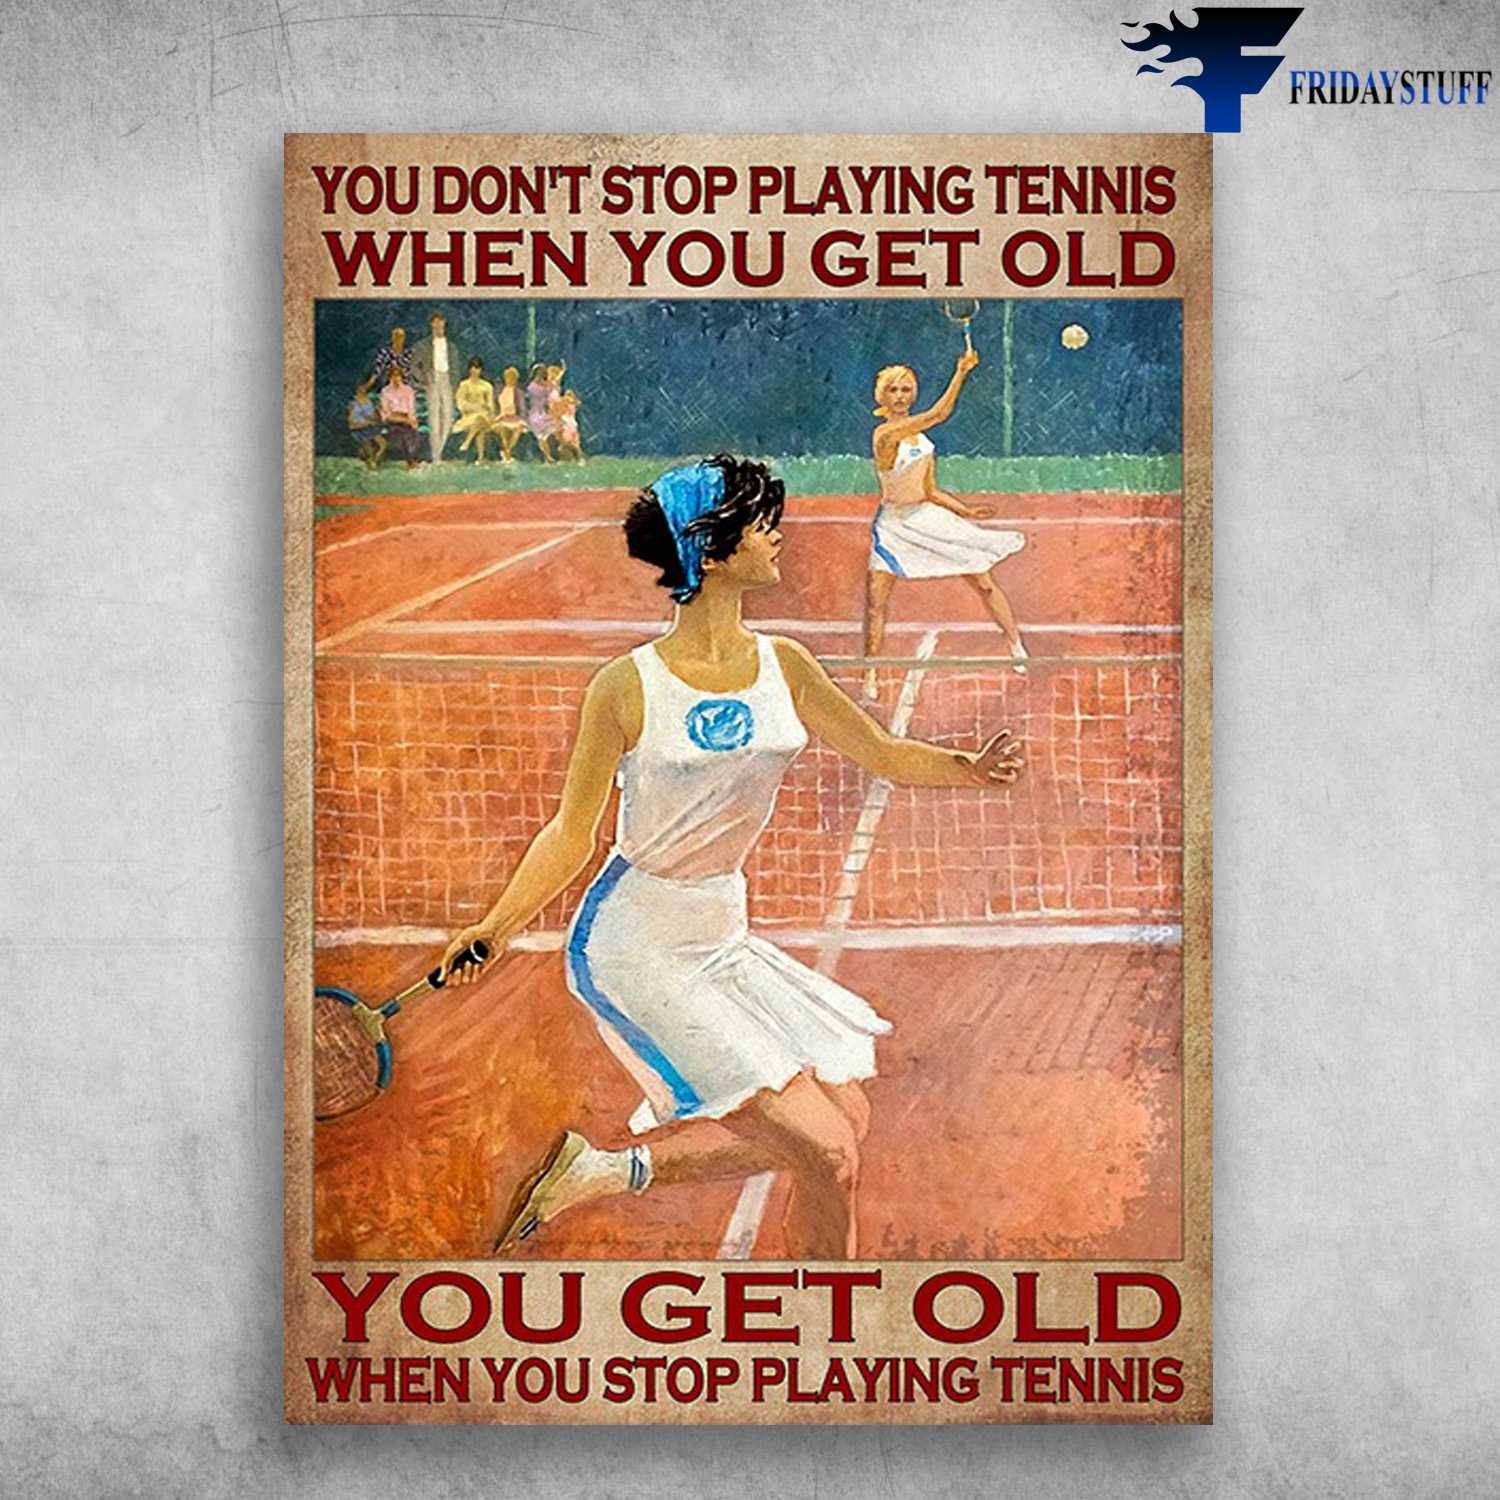 Tennis Players - You Don't Stop Playing Tennis When You Get Old, You Get Old When You Are Stop Playing Tennis, Tennis Loves